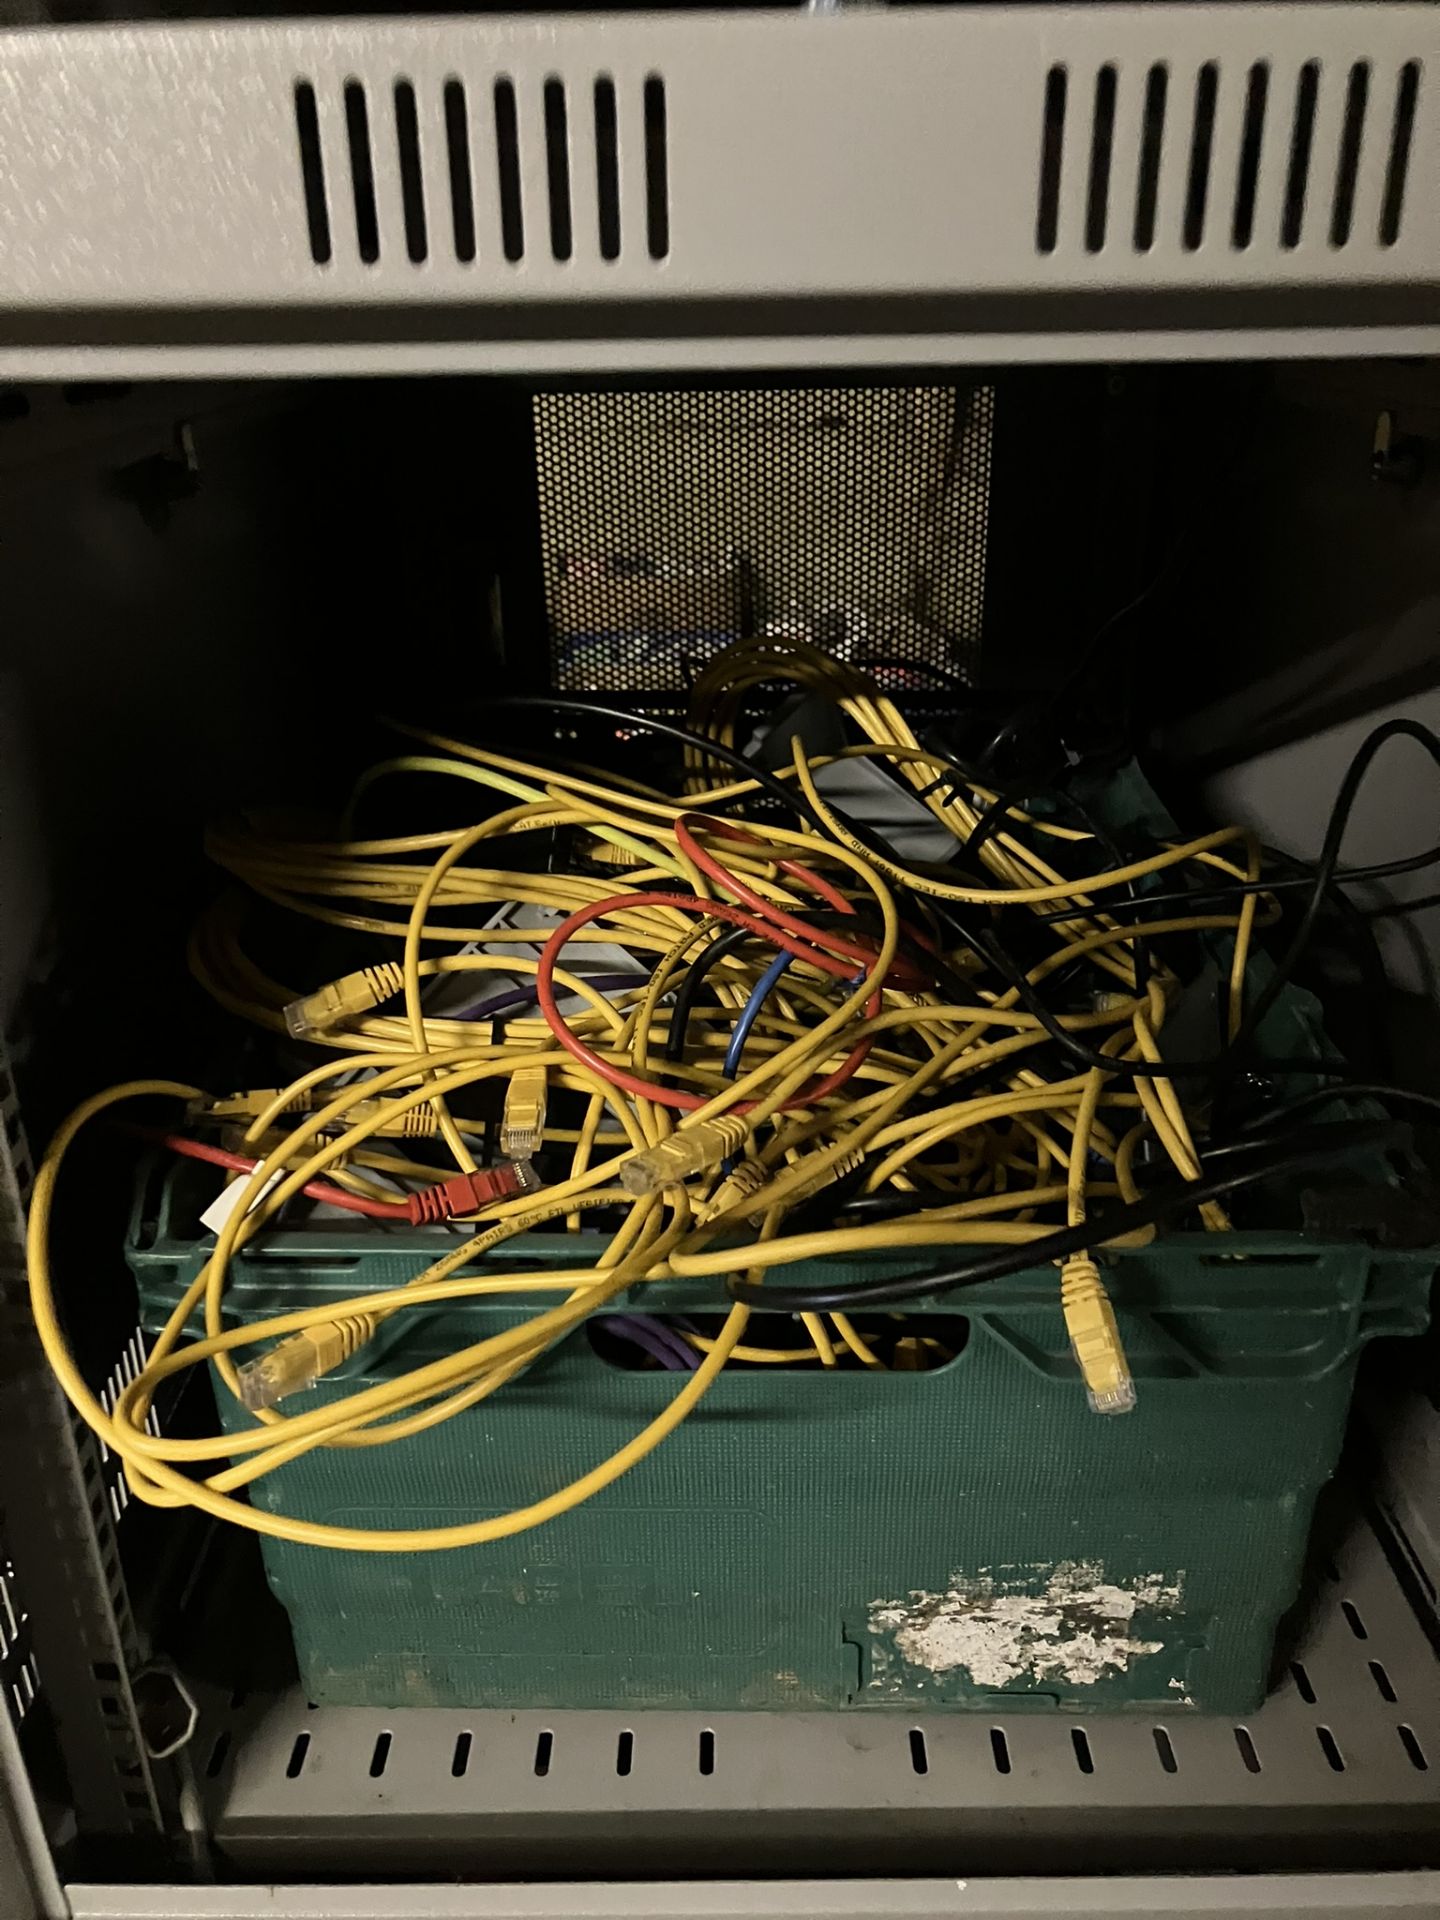 Unbranded server cabinet and box of cables - Image 2 of 2